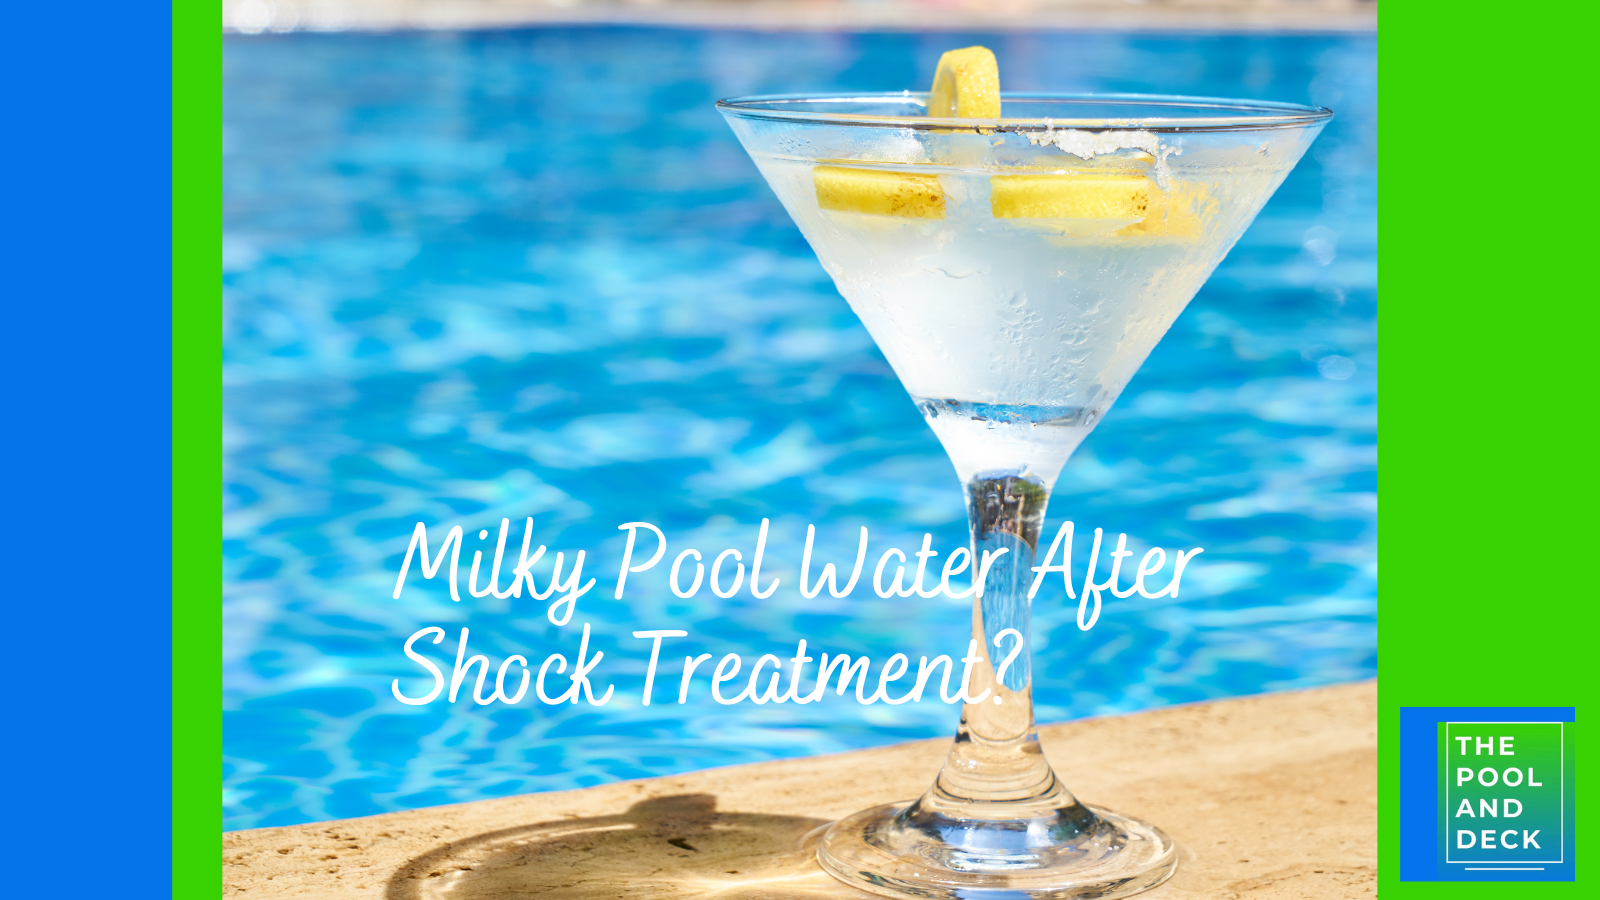 Milky Pool Water After Shock Treatment? Easy to Fix!